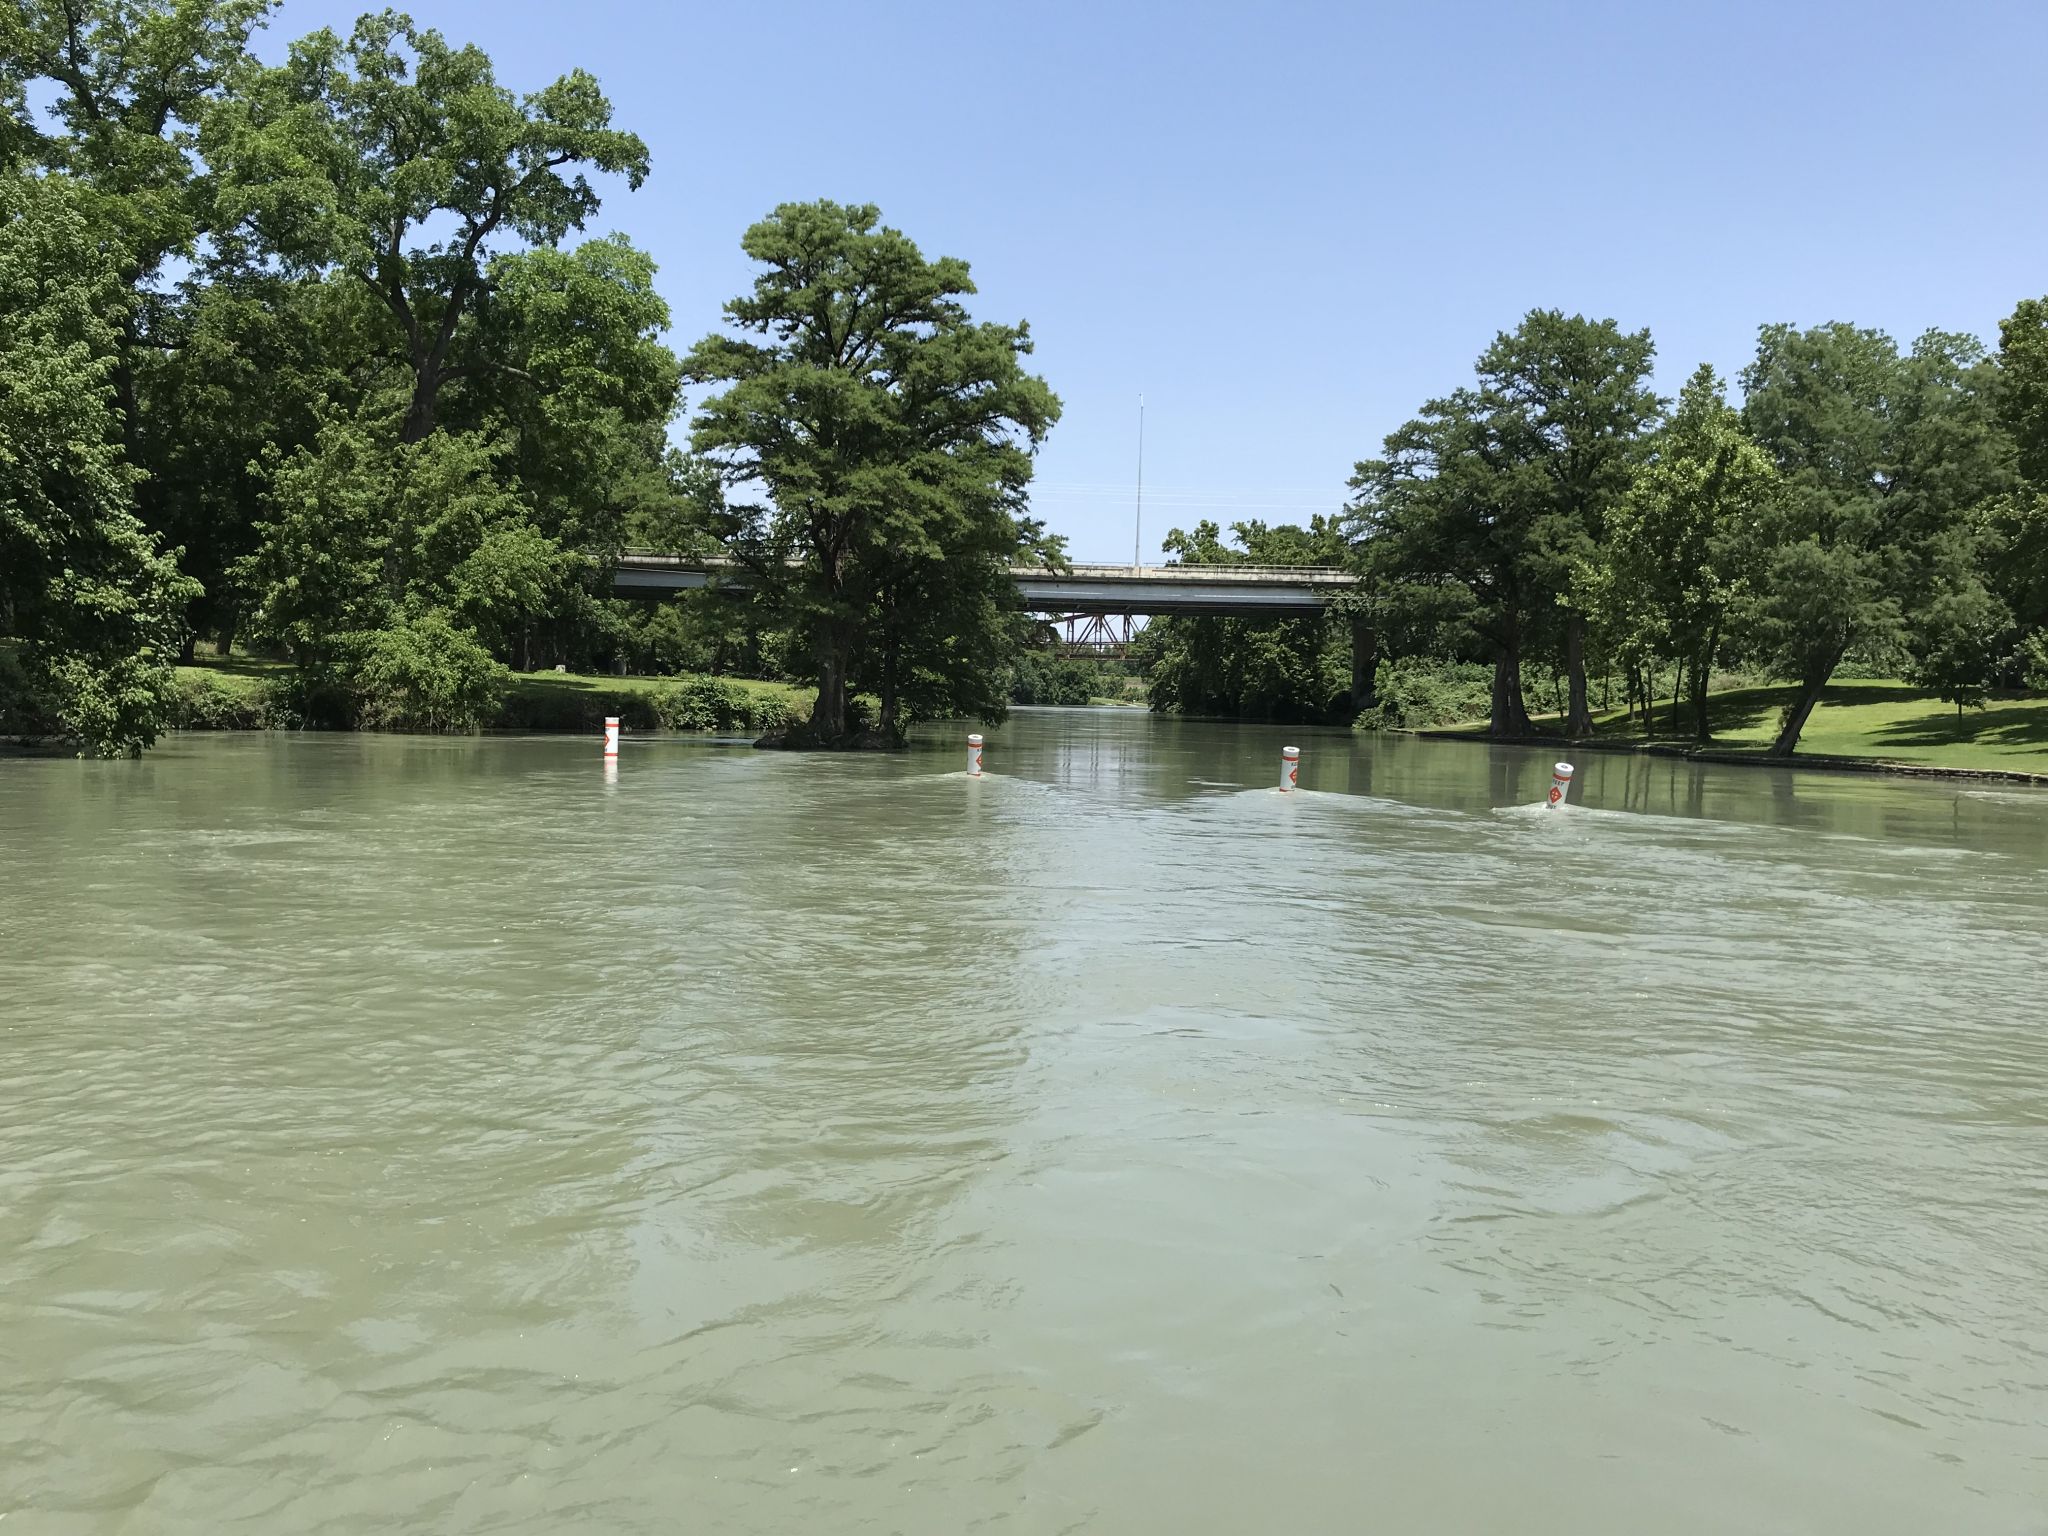 Bodies of father, good Samaritan who rescued children recovered from Guadalupe River